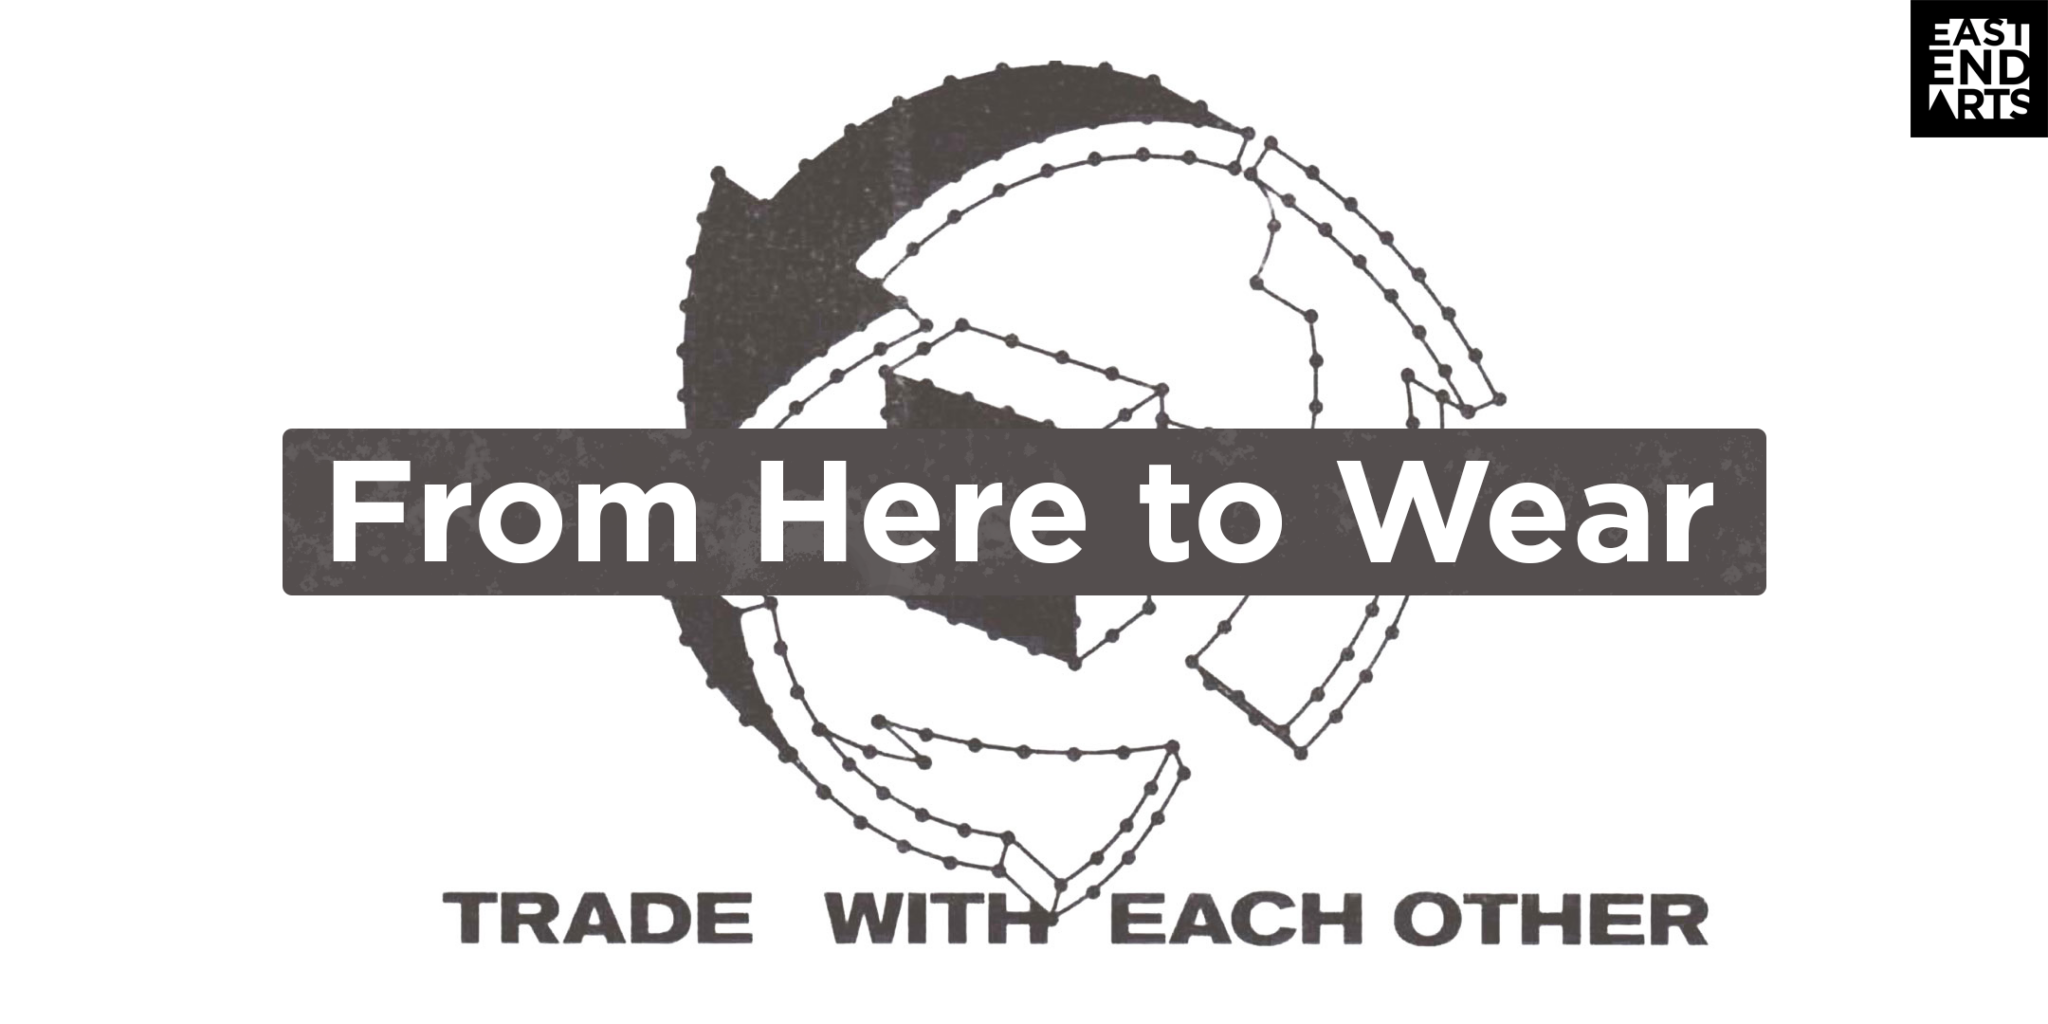 A banner with a recycle logo at the bottom it reads: "Trade with each other."